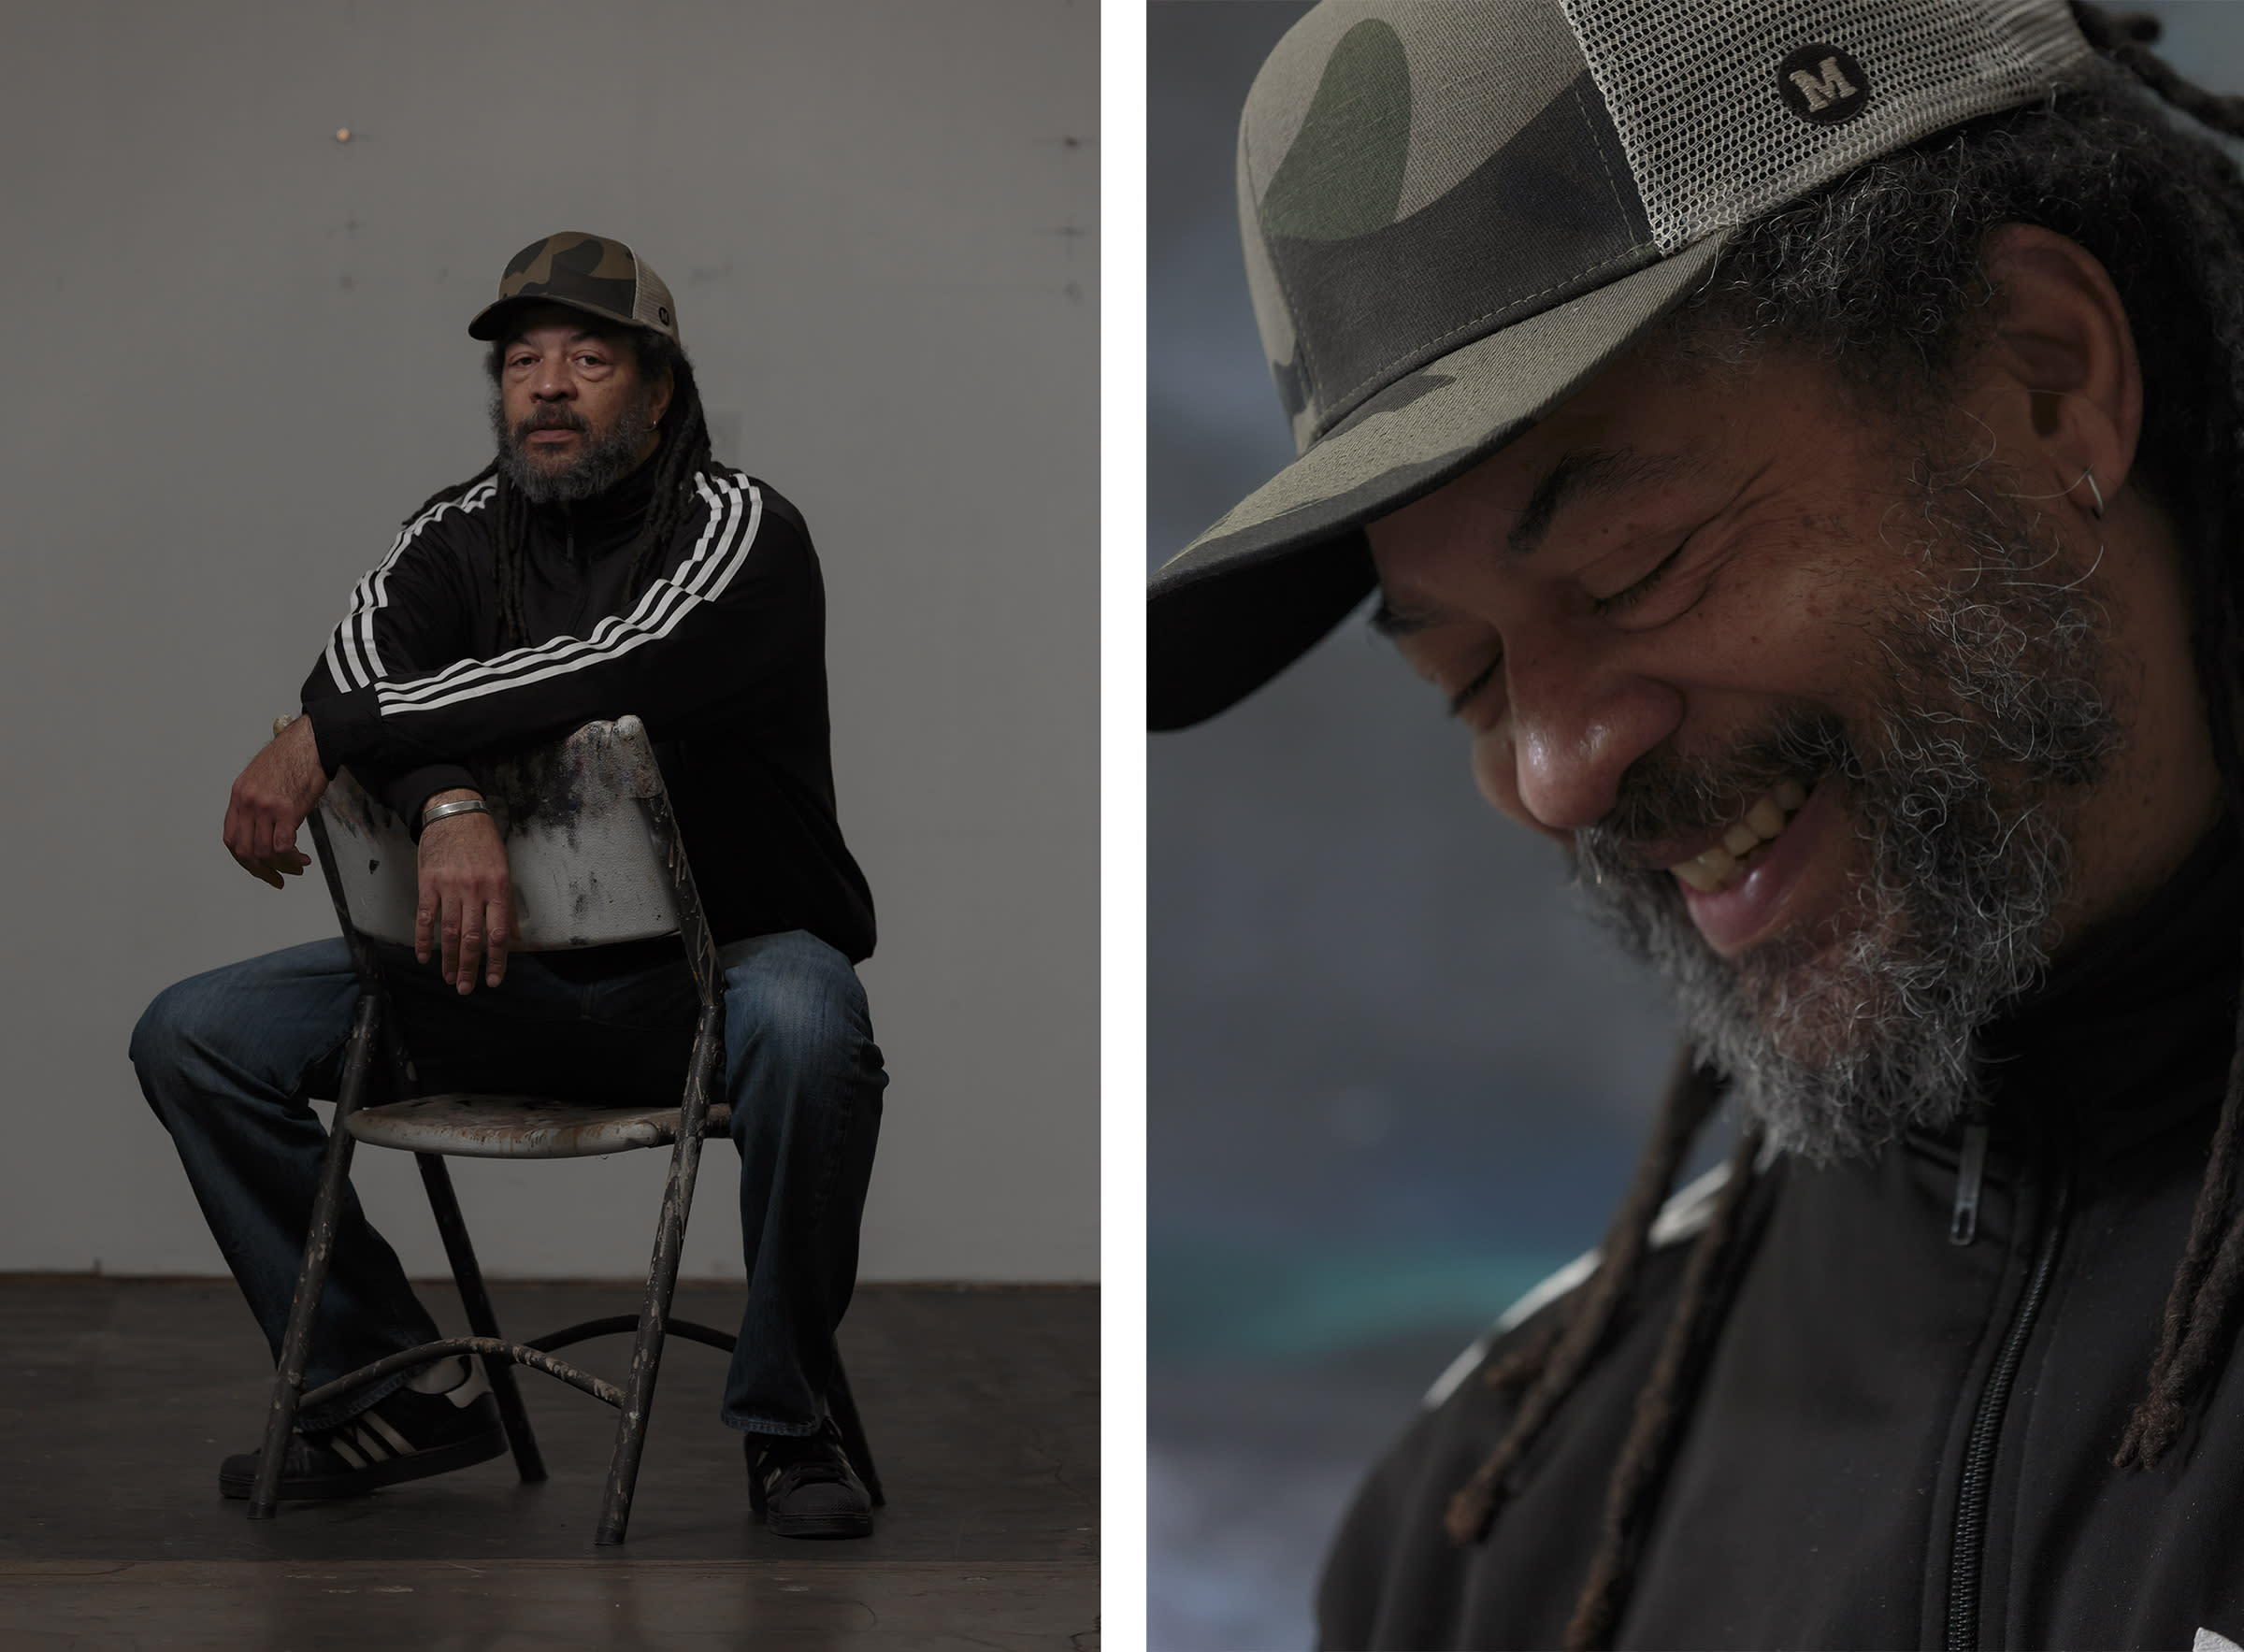 Gary Simmons. Photographs by Tito Molina/HRDWRKER. Courtesy of the artist and Hauser & Wirth. © Gary Simmons.